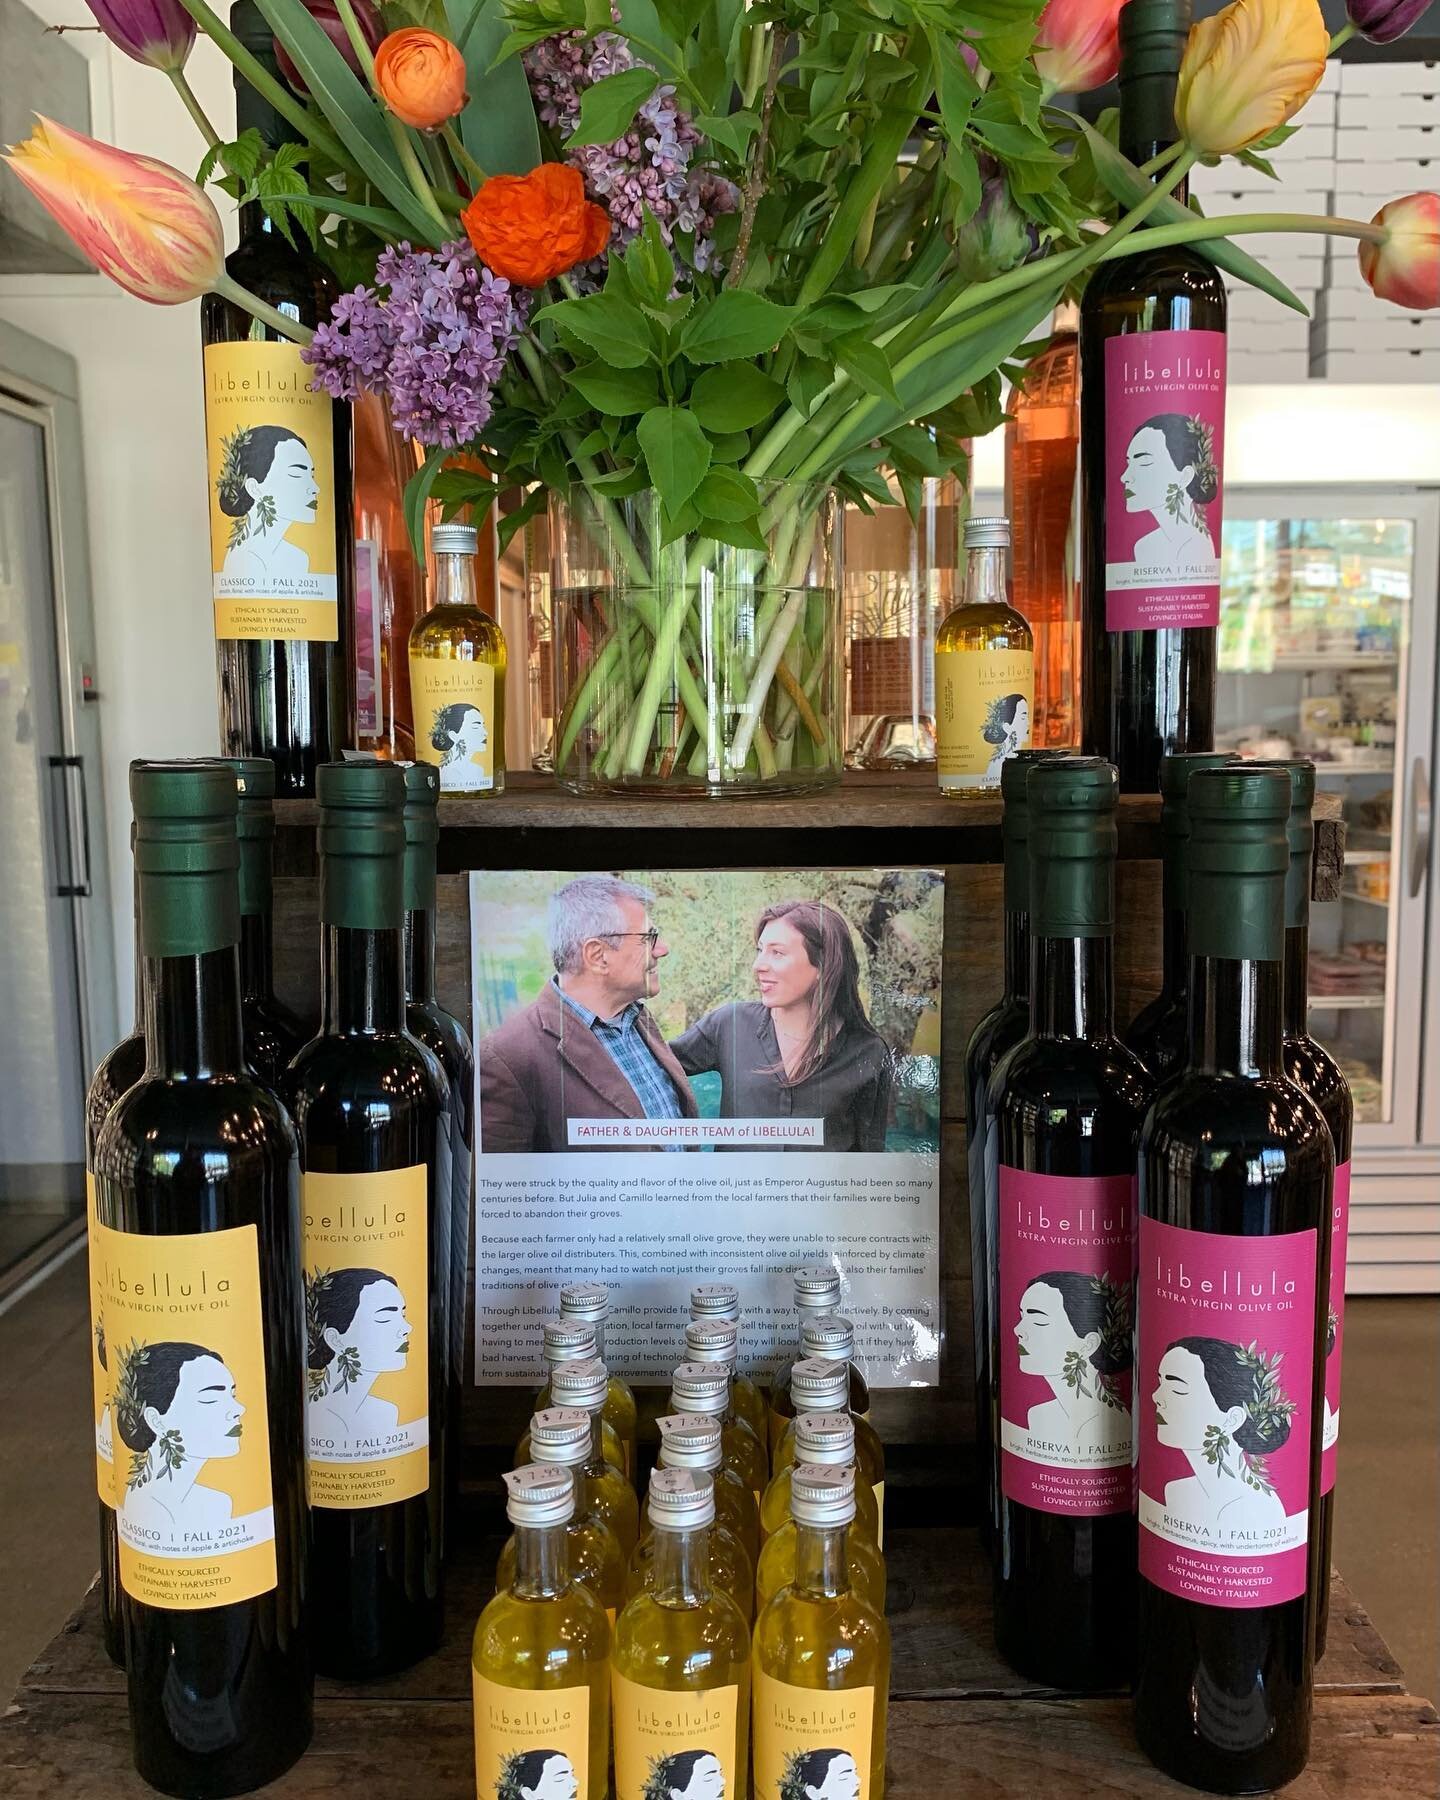 Team-members have a new favorite Olive Oil: LIBELLULA! Find it on our front table, &amp; discover what all the buzz is about&hearts;️

OPEN UNTIL 8
PHONE ORDERS: (207) 613-9873
DELIVERY @2dinein 

#oliveoil #italianoliveoil #neighborhoodgrocery